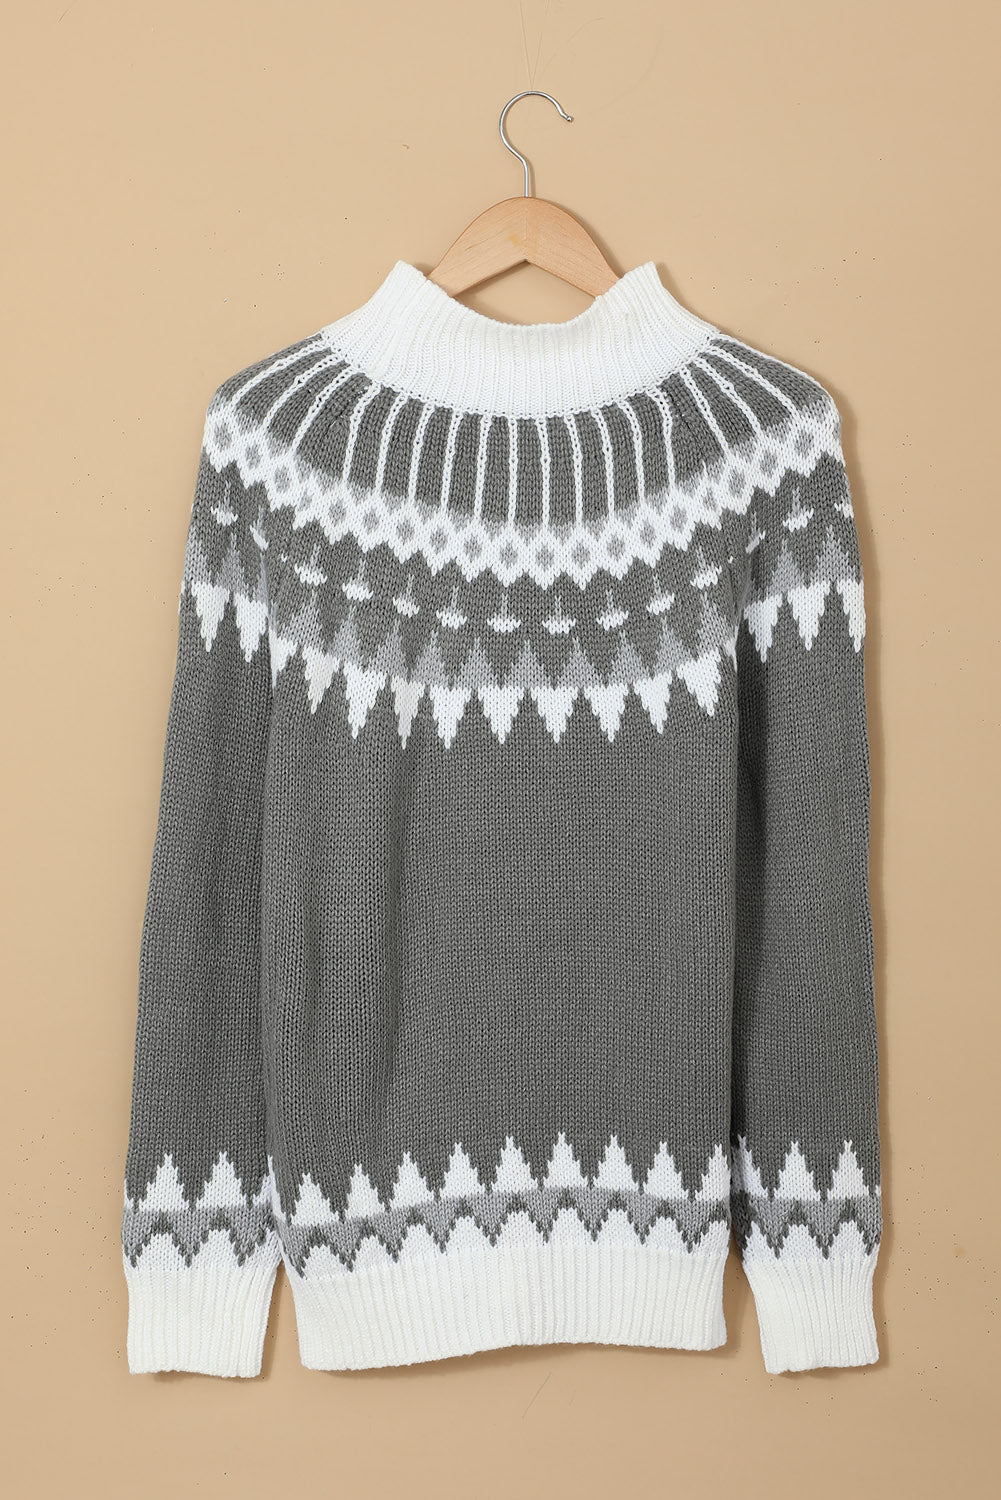 Winter Gray High Neck Printed Knit Sweater